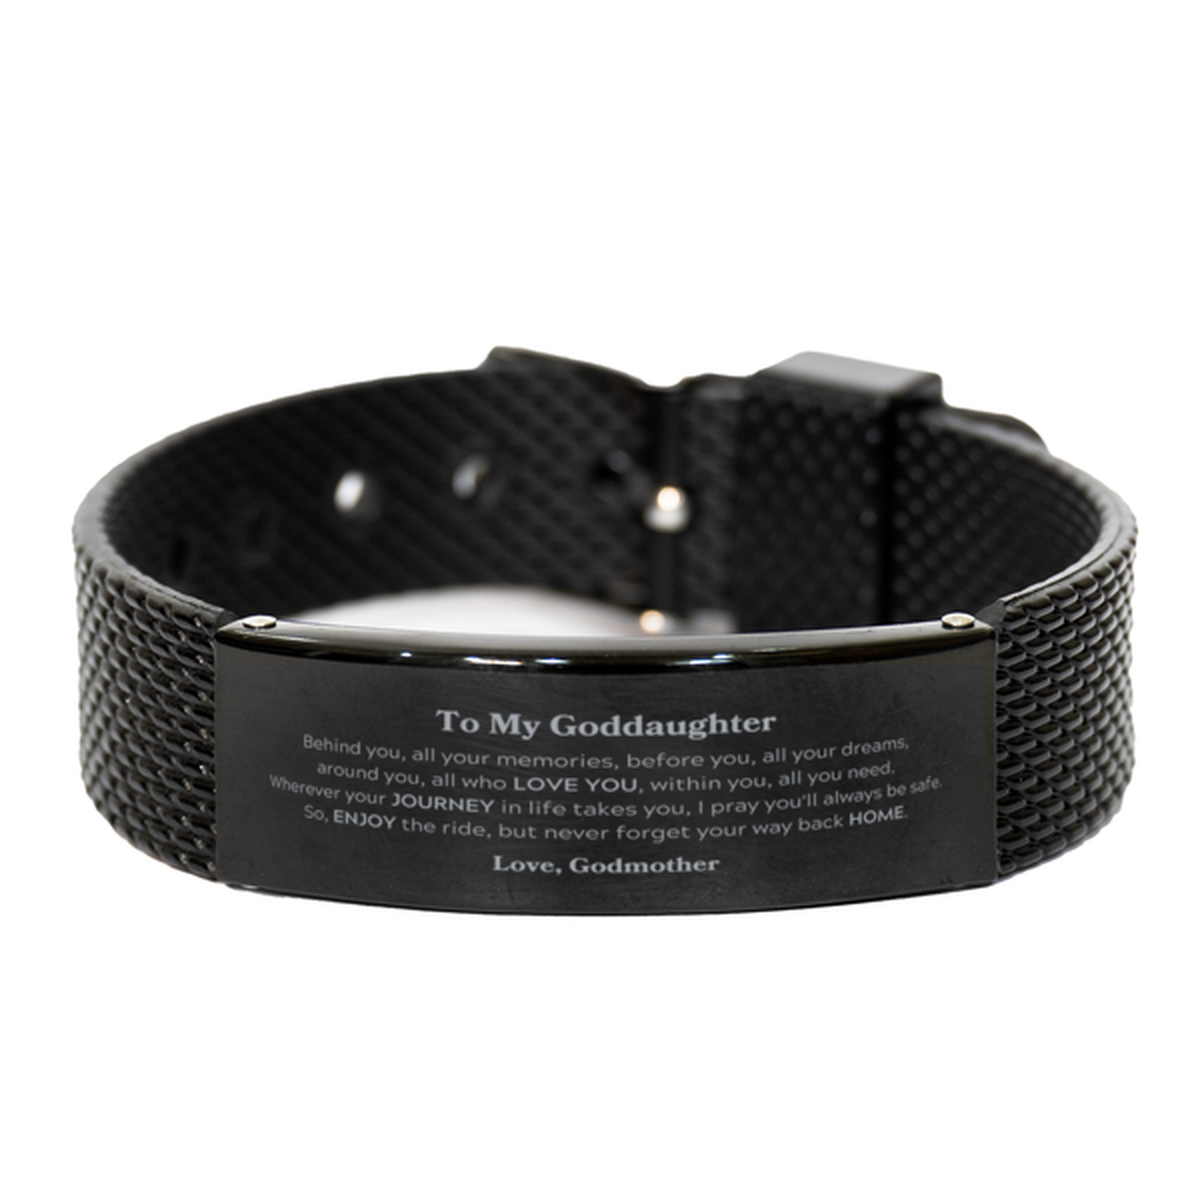 To My Goddaughter Graduation Gifts from Godmother, Goddaughter Black Shark Mesh Bracelet Christmas Birthday Gifts for Goddaughter Behind you, all your memories, before you, all your dreams. Love, Godmother